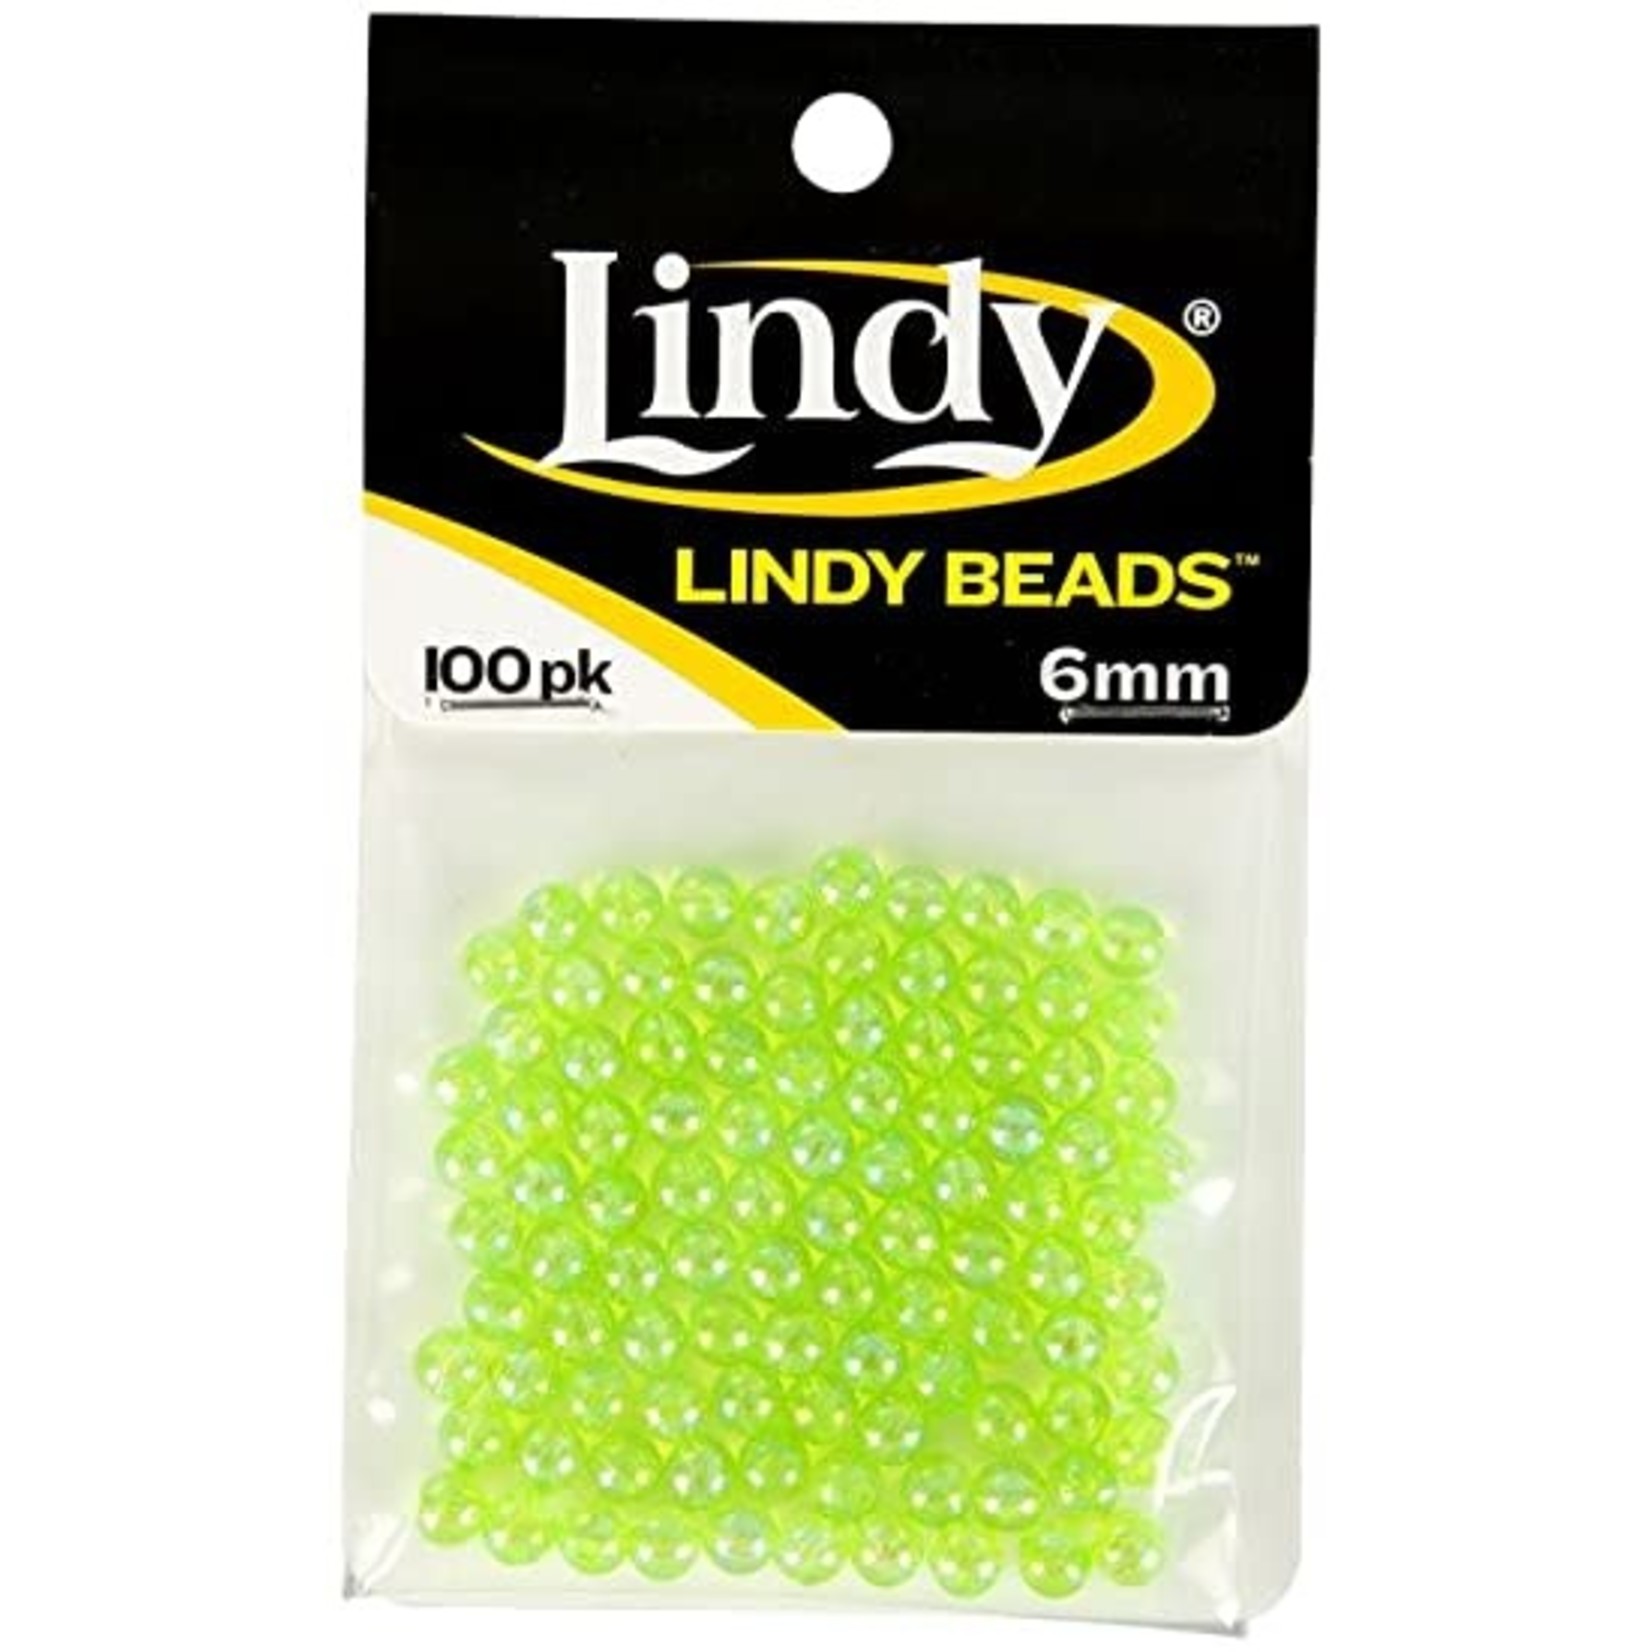 Lindy Lindy Beads